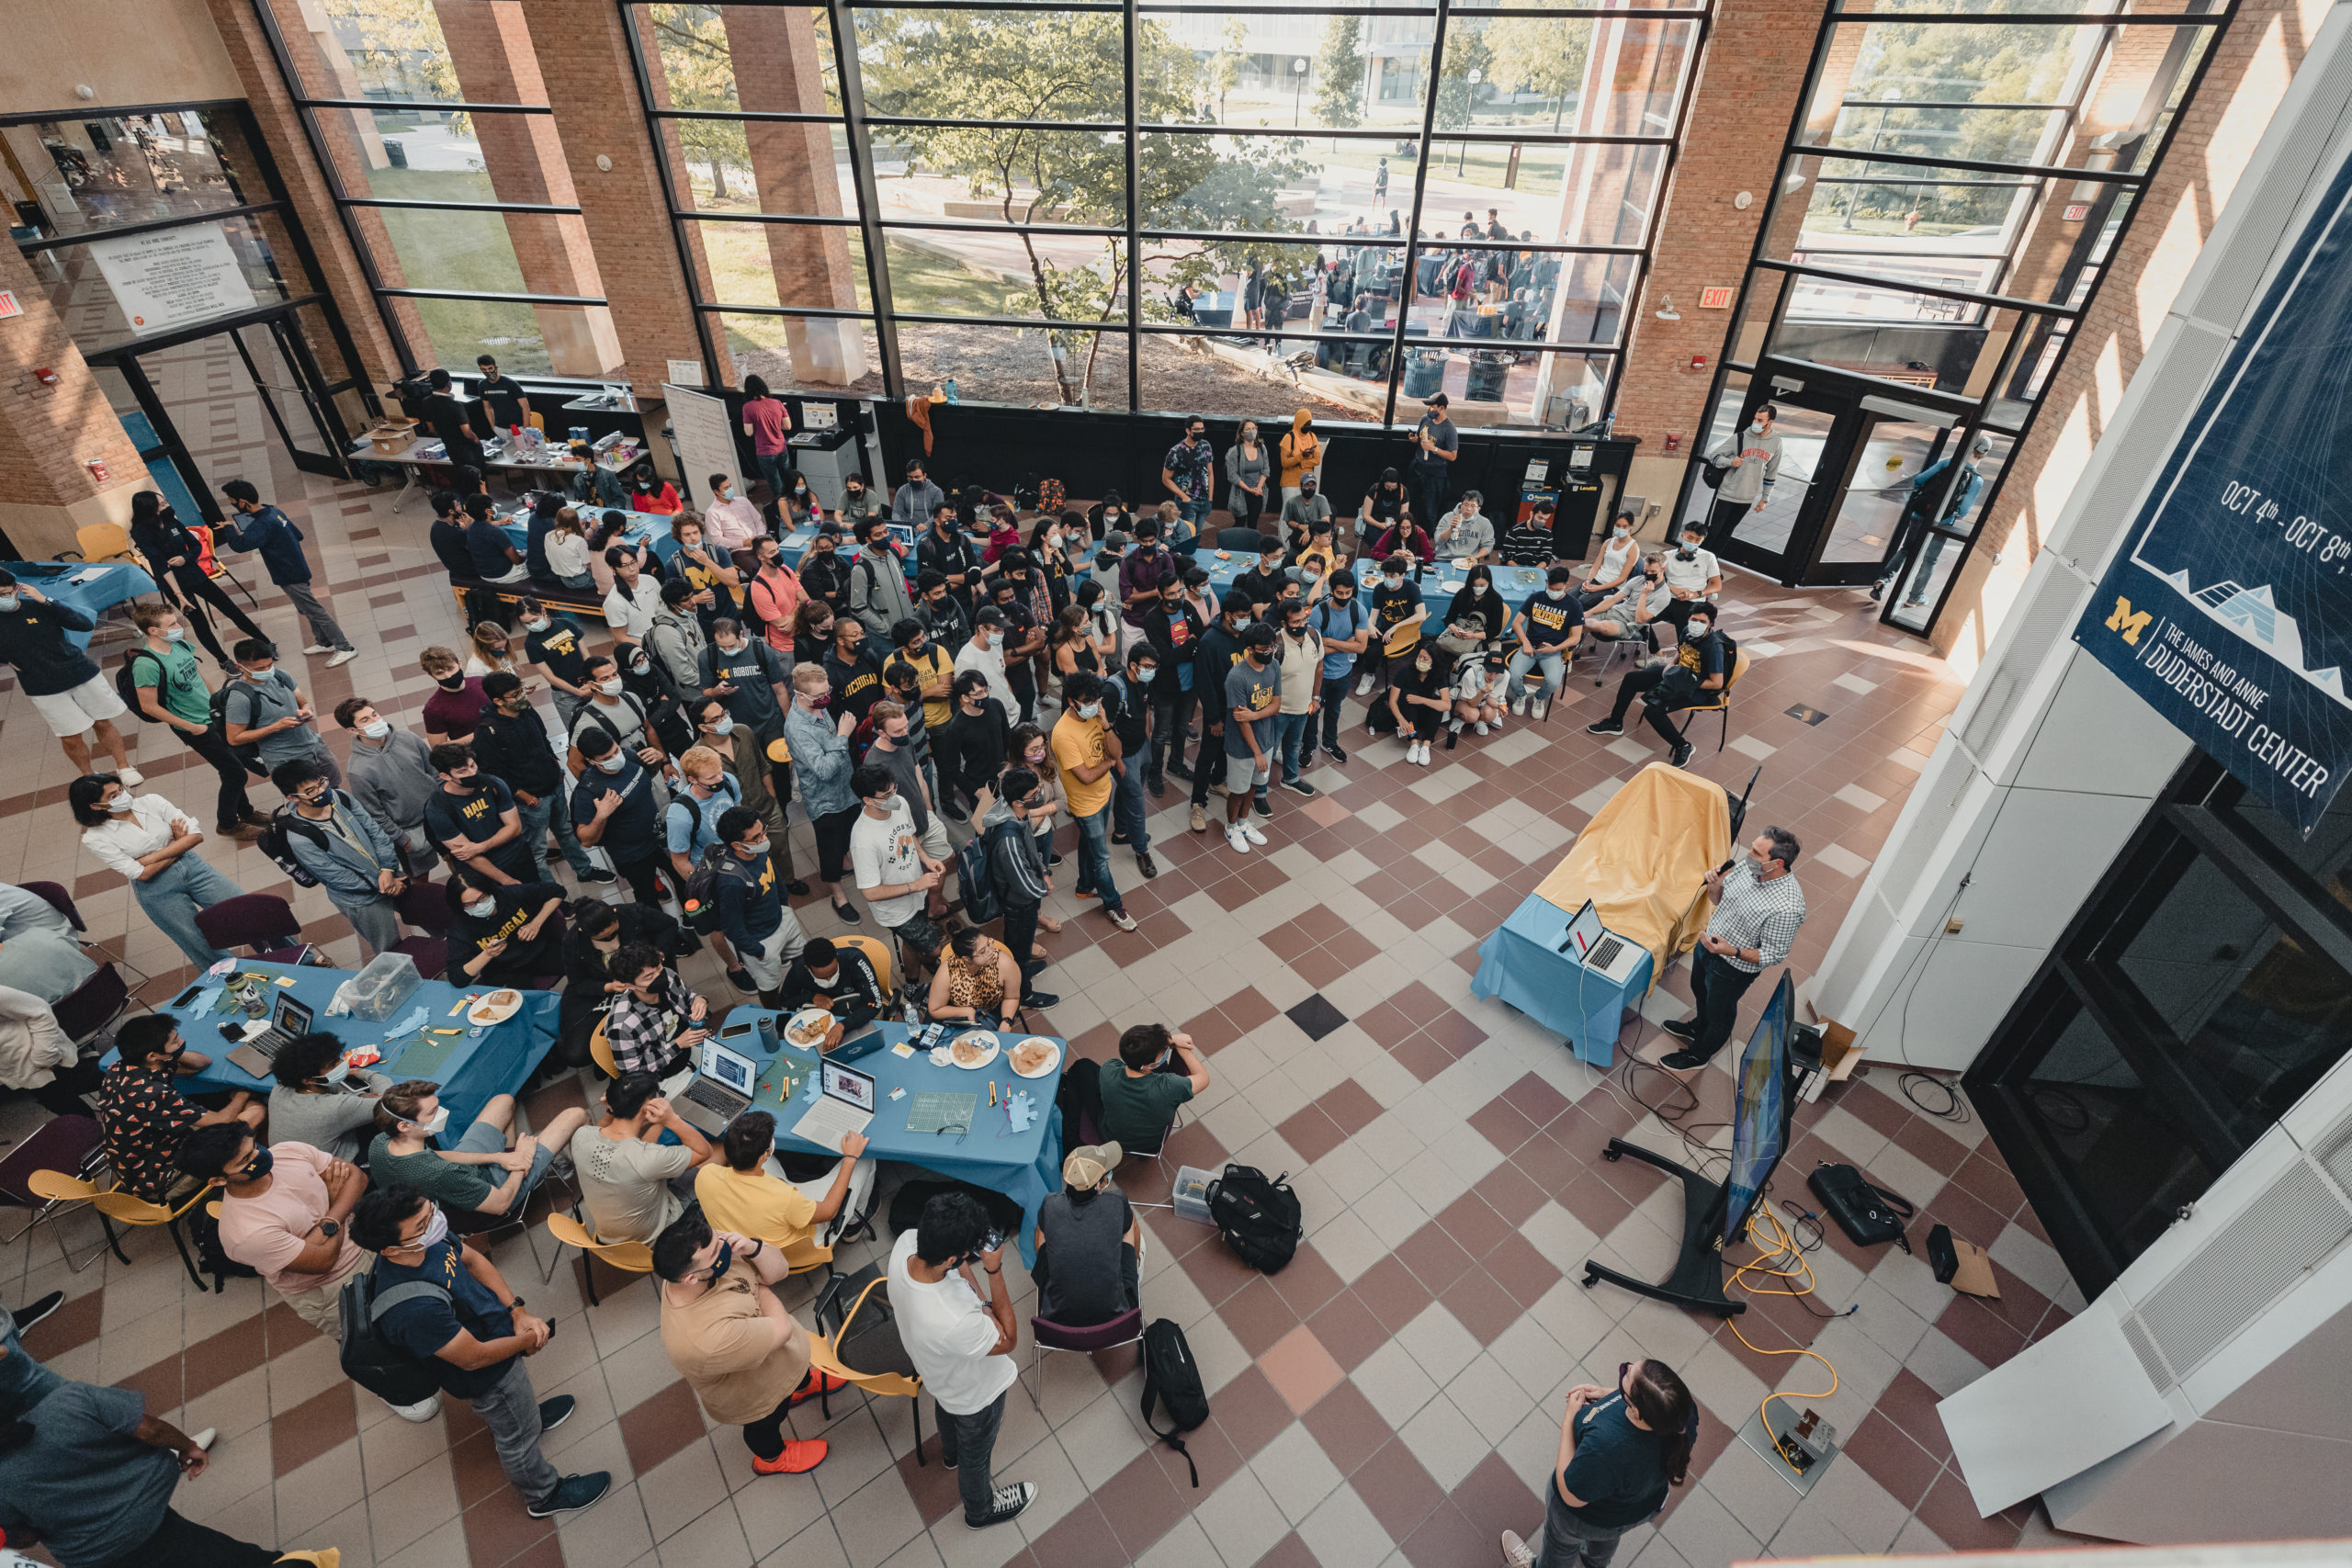 Aerial photo of large crowd gathered in the atrium of the Duderstadt Center